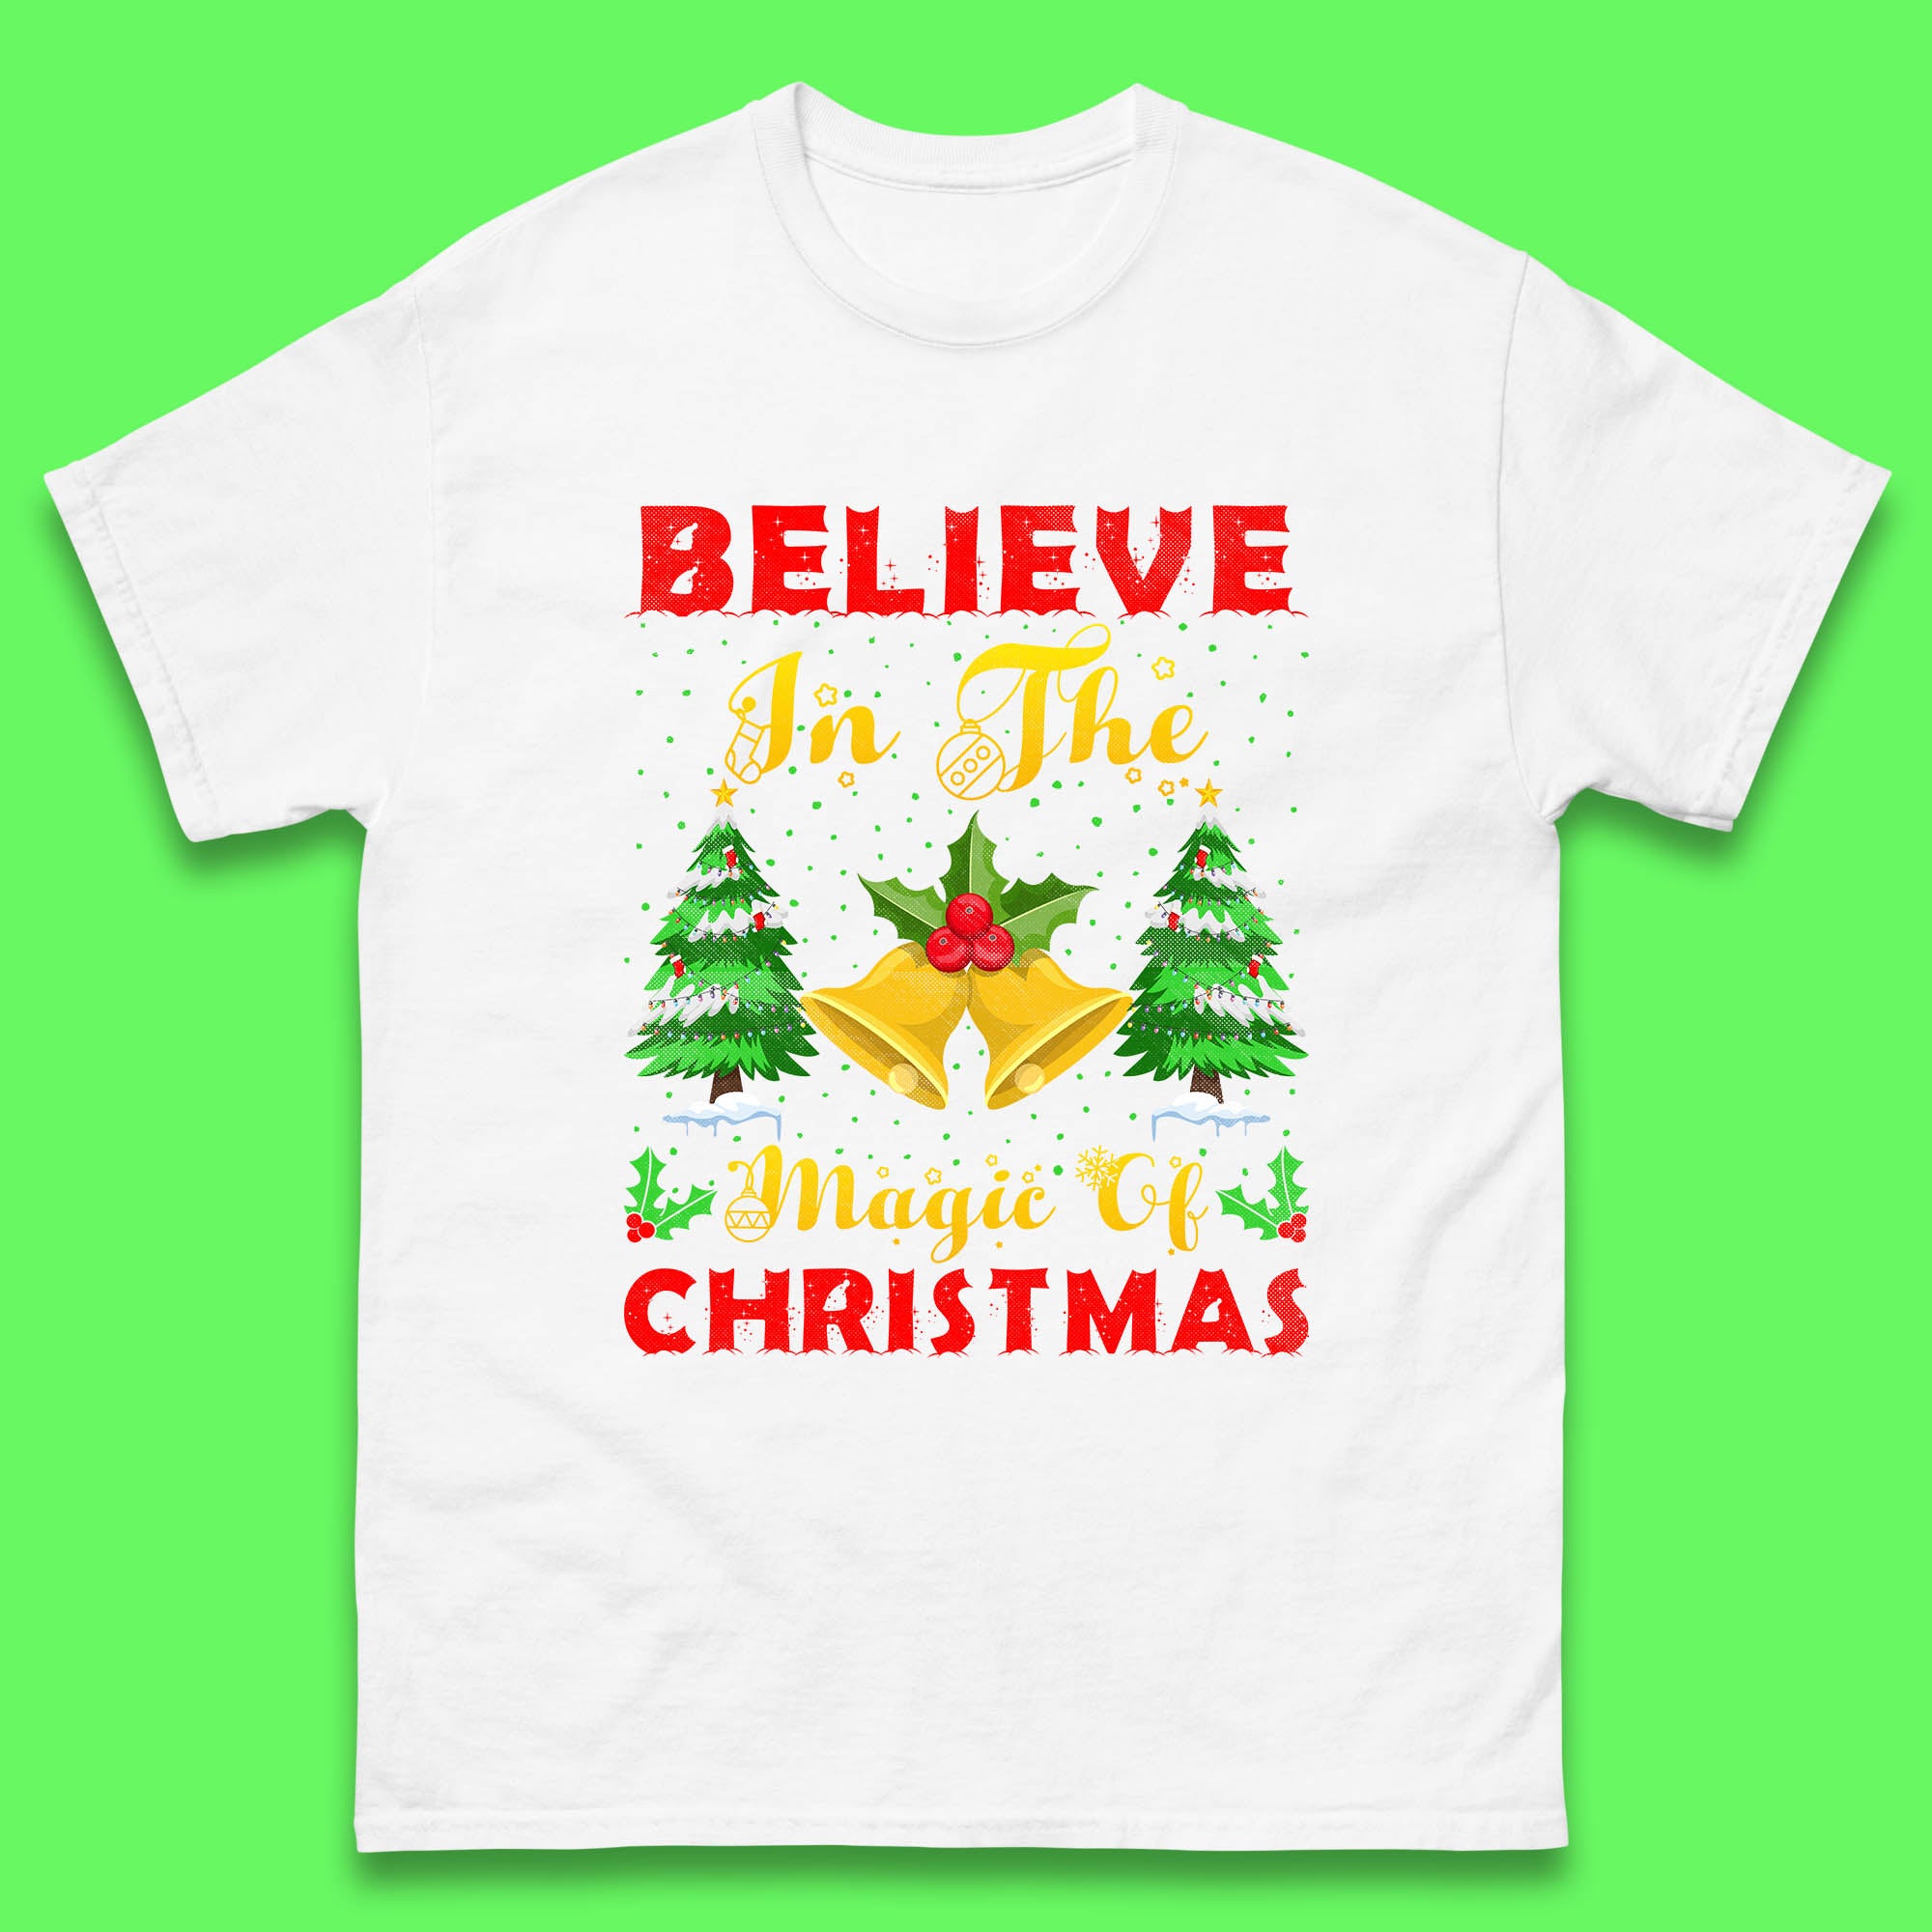 Believe In The Magic Of Christmas Funny Xmas Holiday Festive Mens Tee Top